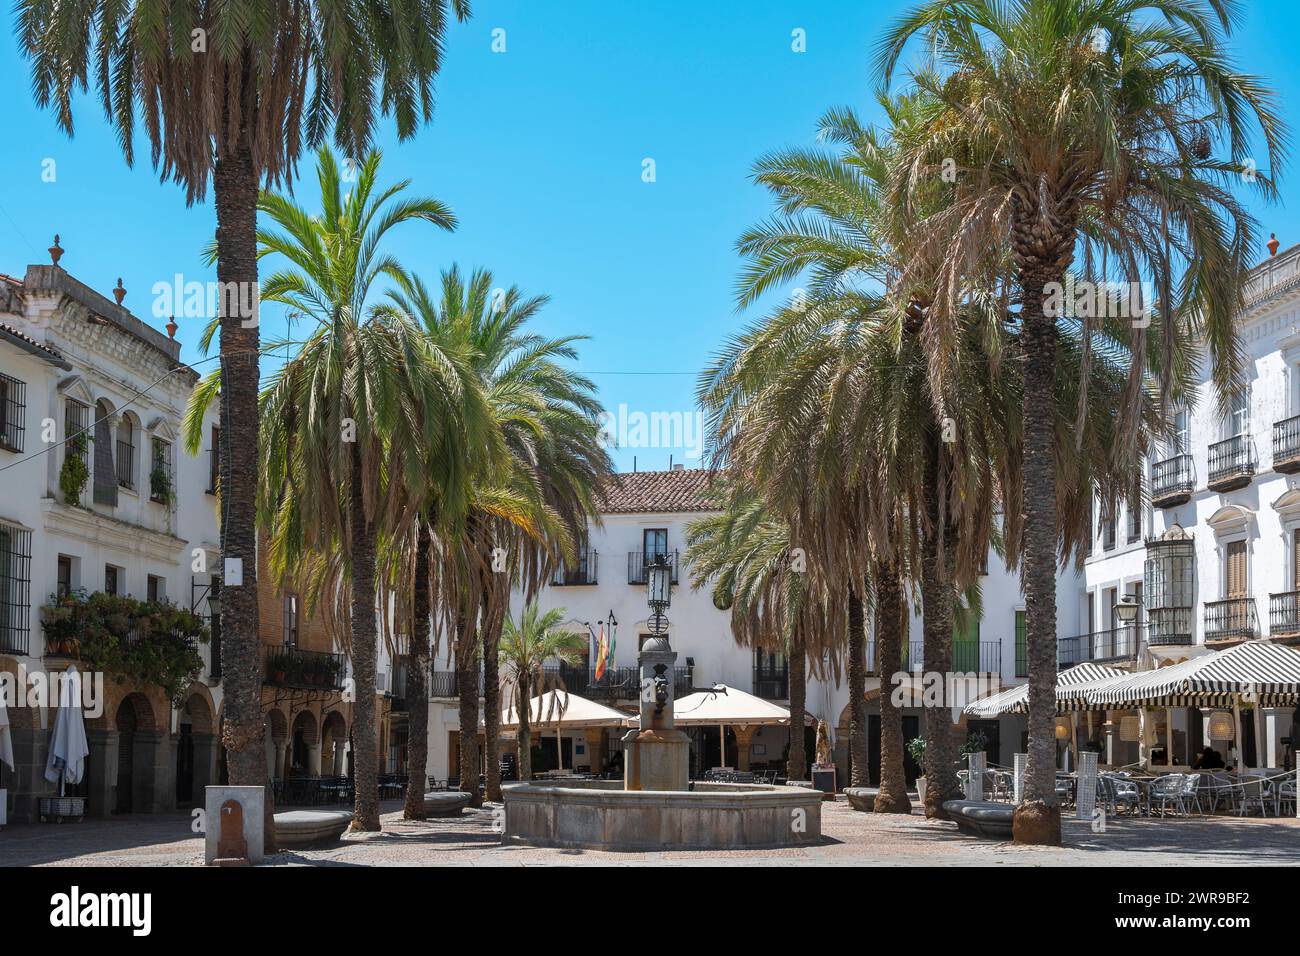 Palm trees near a building outdoors Stock Photo